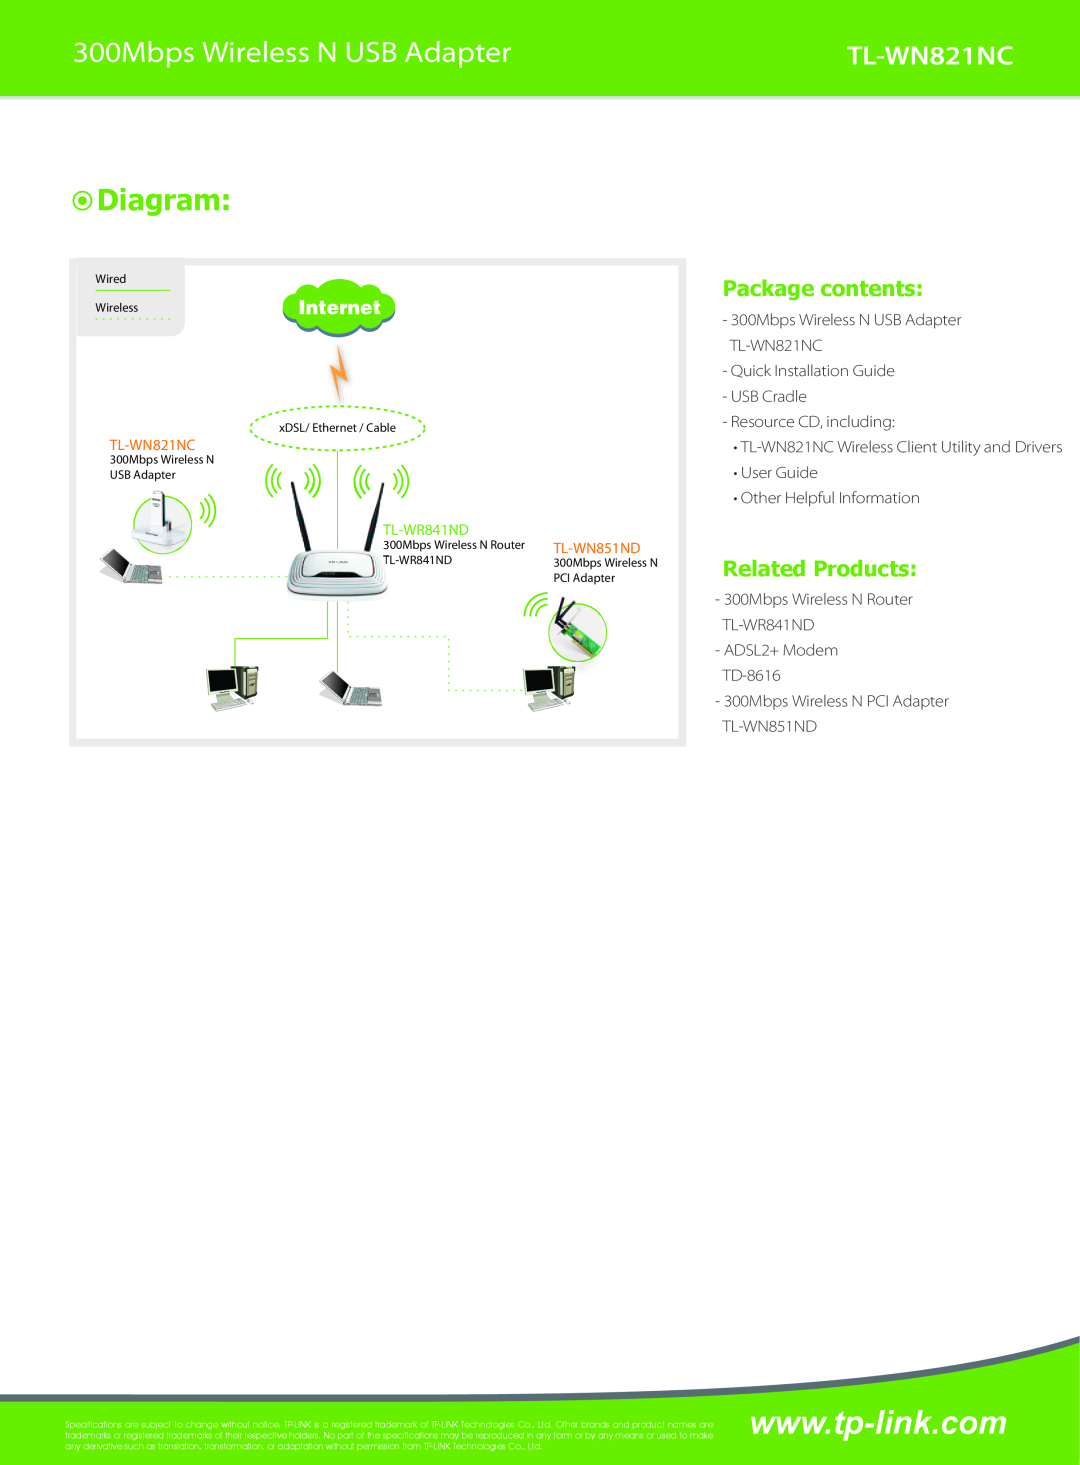 TP-Link manual 15300MbpsWirelesssPCIN USBExpressAdapterAdapterTL-WN821NC, Diagram, Package contents, Related Products 